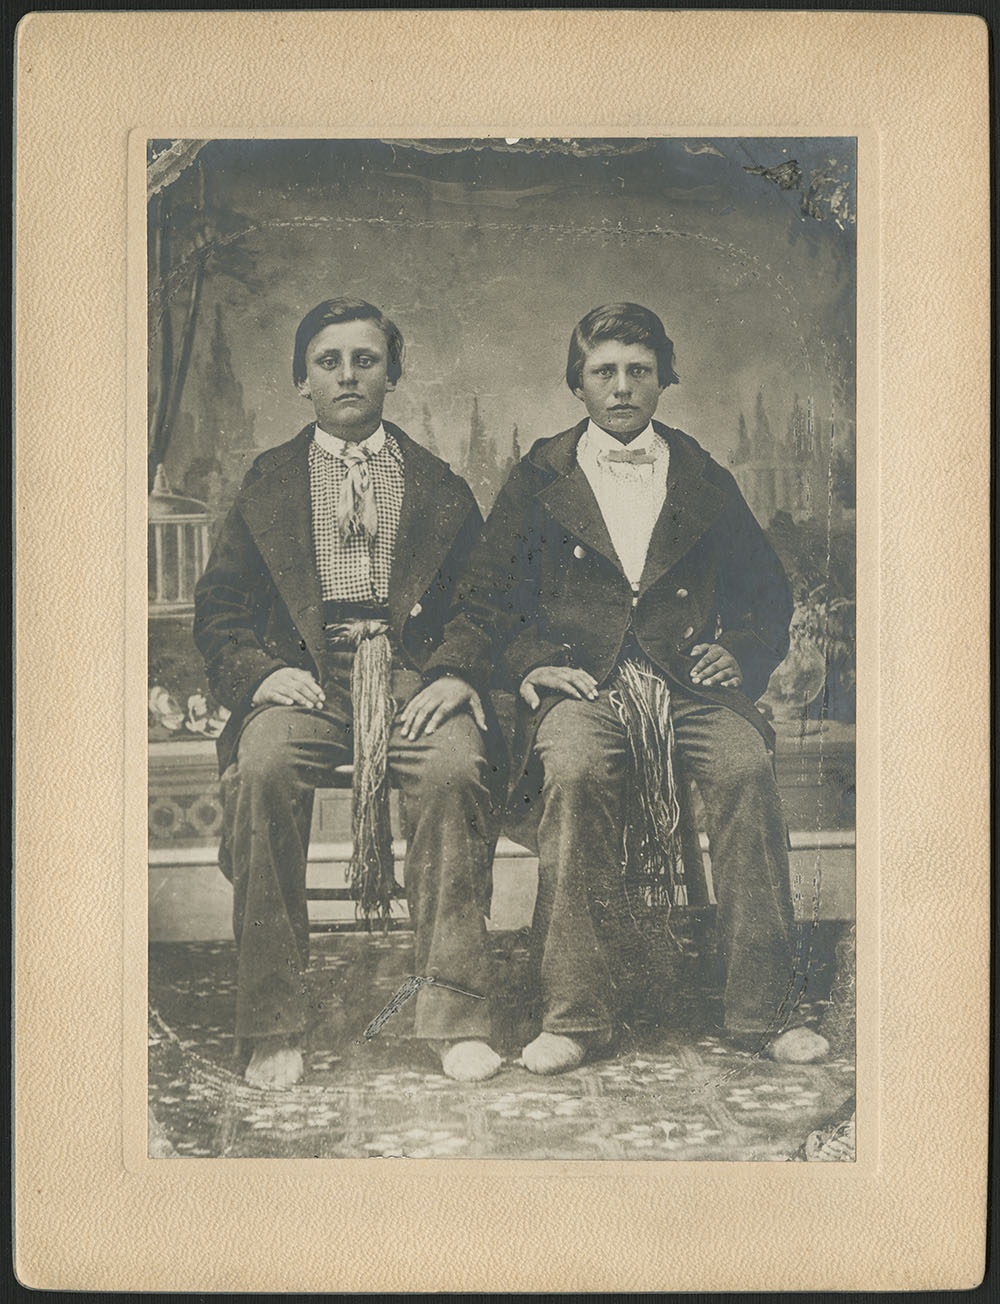 Black and white studio photograph of two boys wearing sashes under dark overcoats and sitting next to one another.